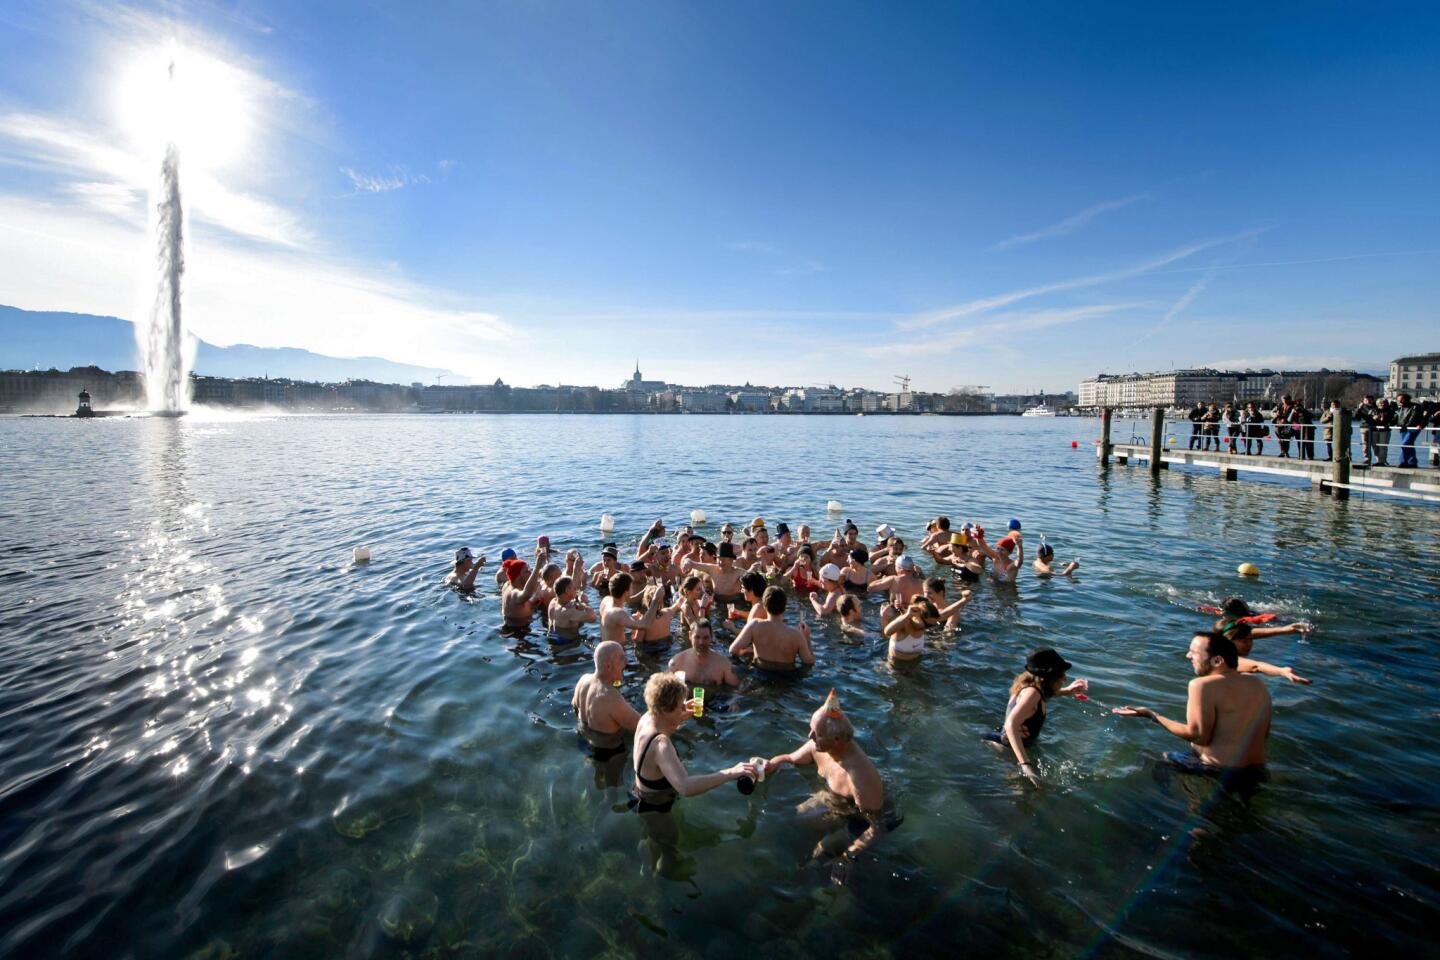 People hold glasses of sparkling wine as they celebrate the new year with a dip into the chilly waters of Lake Geneva in Switzerland. About 60 swimmers took part in the 20th edition of the traditional bath.